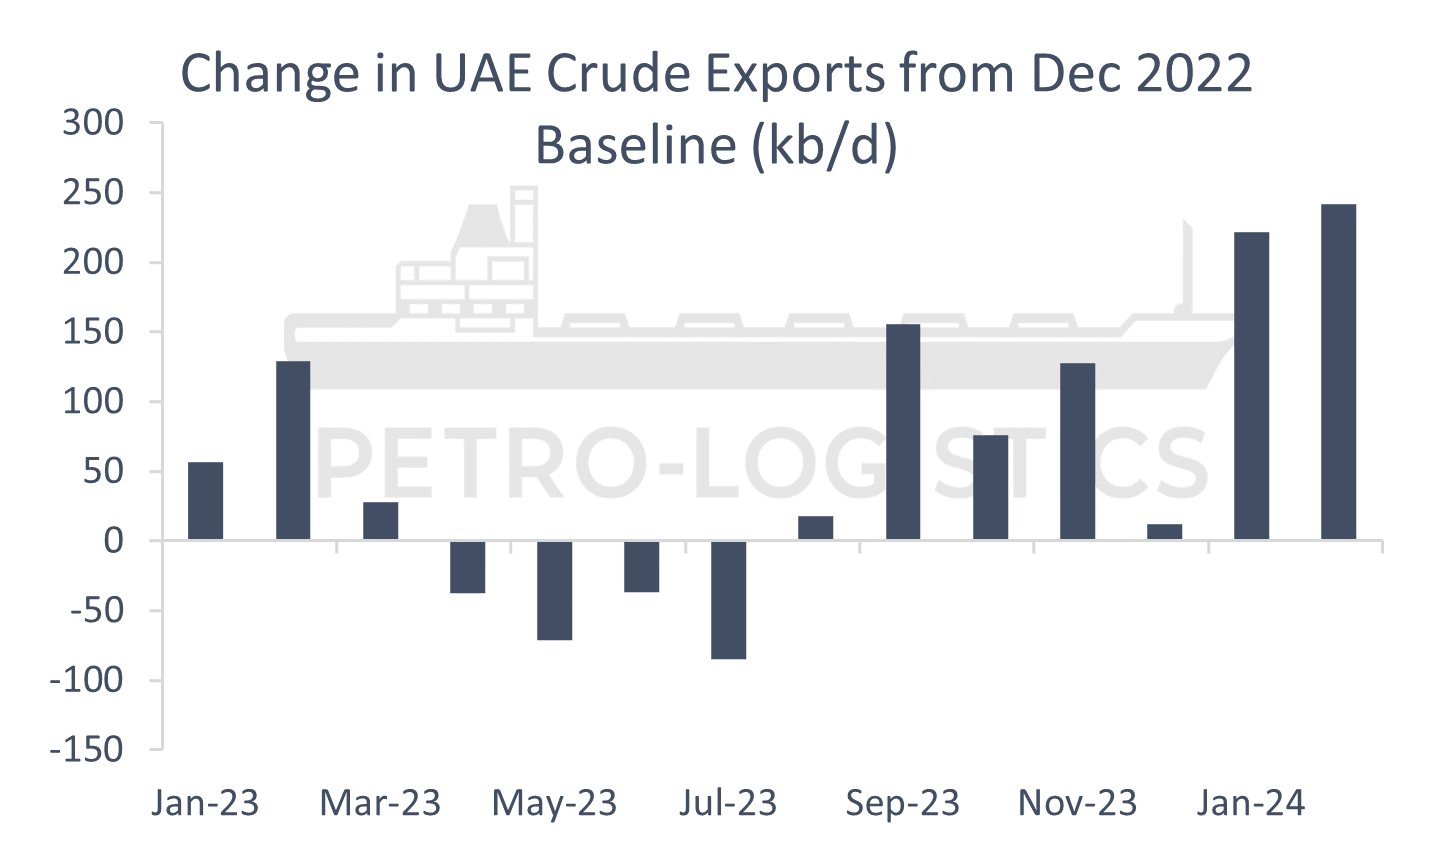 Change in UAE Crude Exports from Dec 2022 Baseline